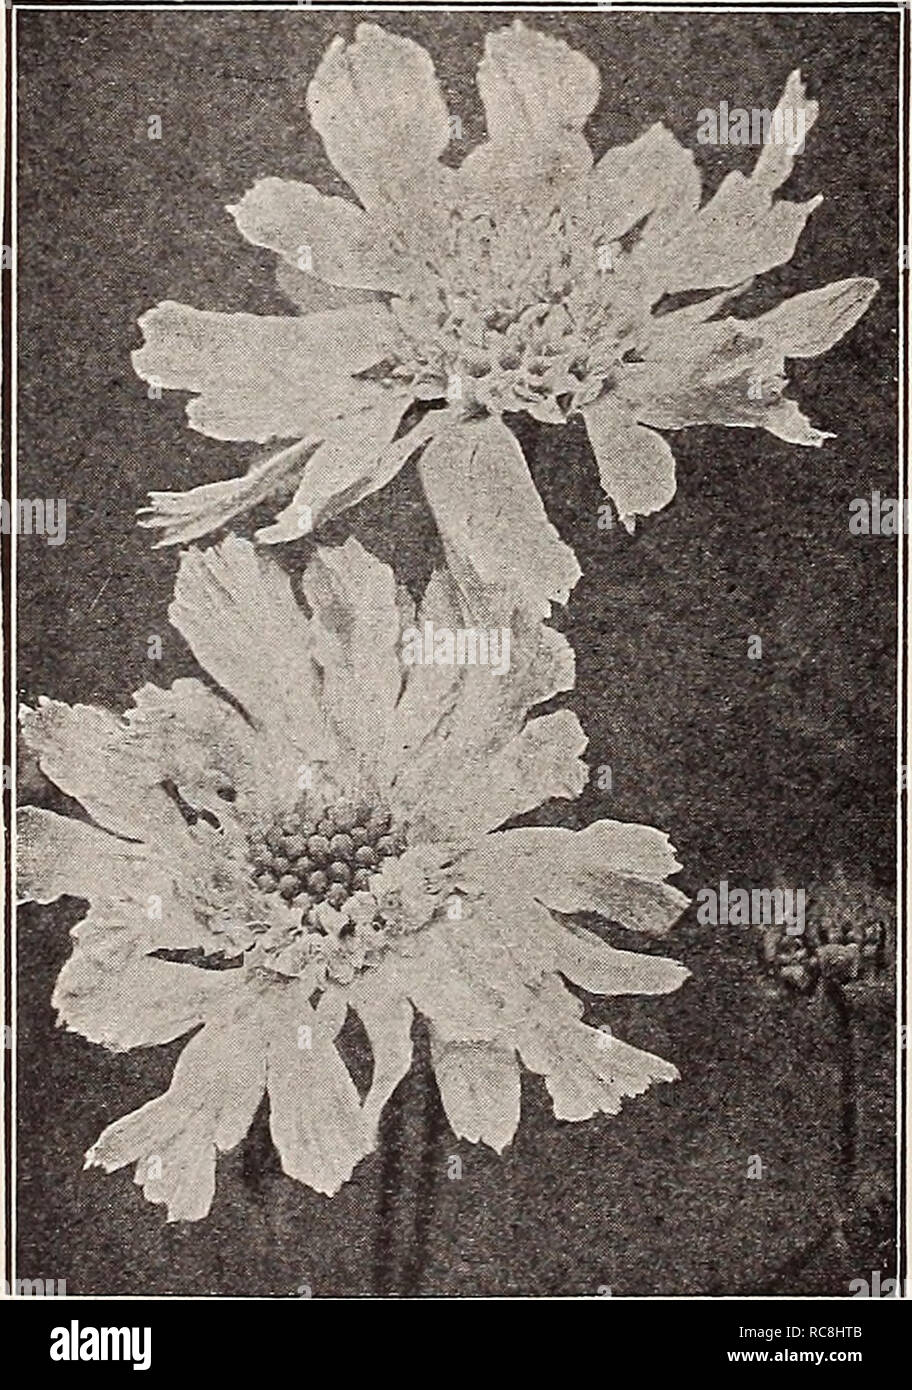 . Dreer's garden book 1932. Seeds Catalogs; Nursery stock Catalogs; Gardening Equipment and supplies Catalogs; Flowers Seeds Catalogs; Vegetables Seeds Catalogs; Fruit Seeds Catalogs. RELIABLE FLOWER SEEDS/4 Saponaria PER PKi. 3939 Ocymoides. Very showy hardy perennial rock plant, producing during the summer months masses of small, bright rose flowers; 9 inches.  oz., 25 cts $0 10 3940 Vaccaria. A pretty and useful annual variety, grows about 2 feet high, and bears masses of satiny pink flowers somewhat like an enlarged Gypsophila; charm- ing for cutting, adding grace to any arrangement of fl Stock Photo